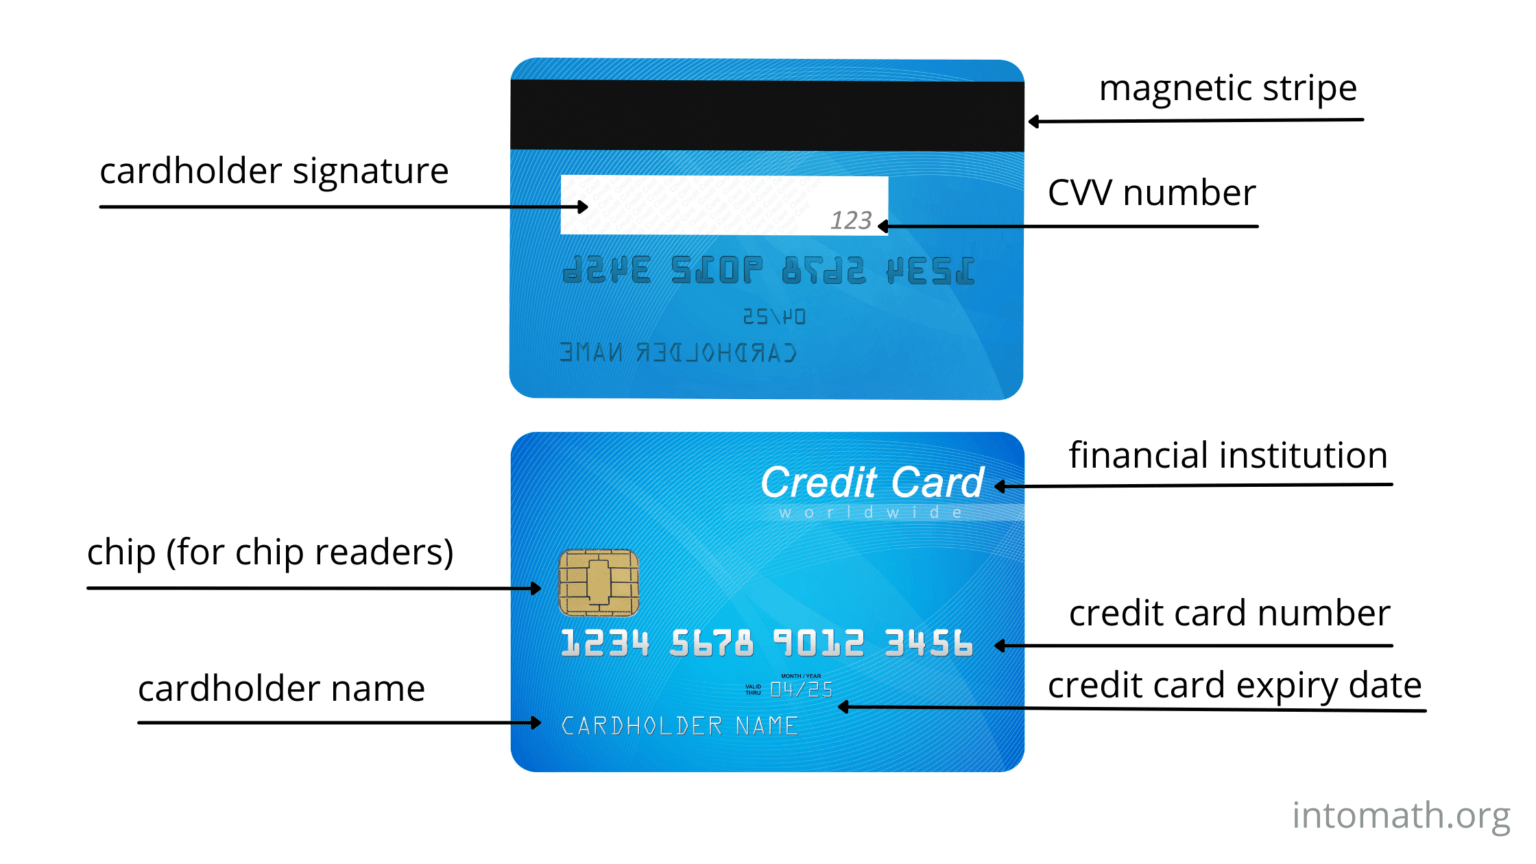 How to get a credit card - IntoMath